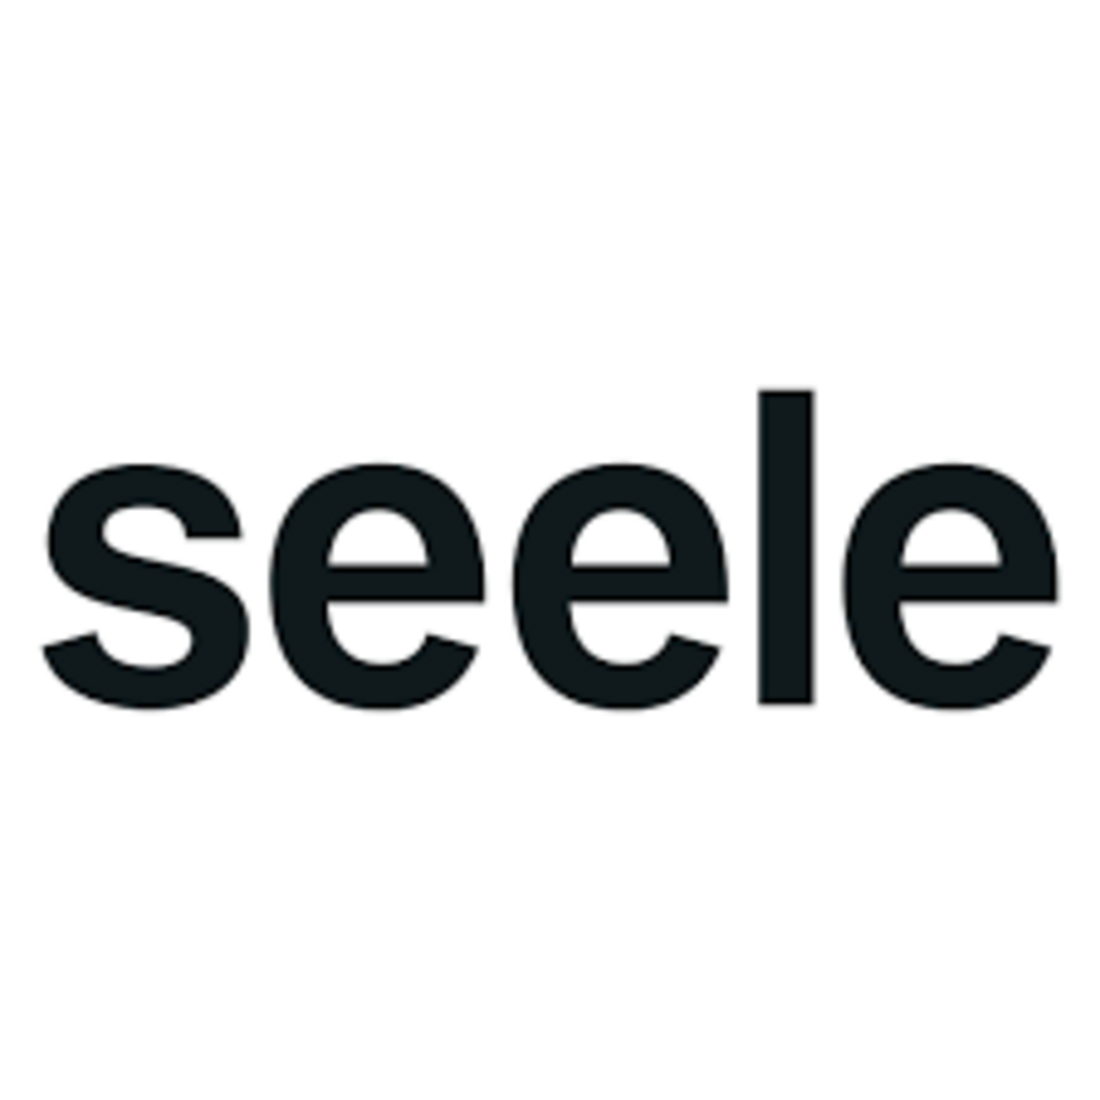 seelecover